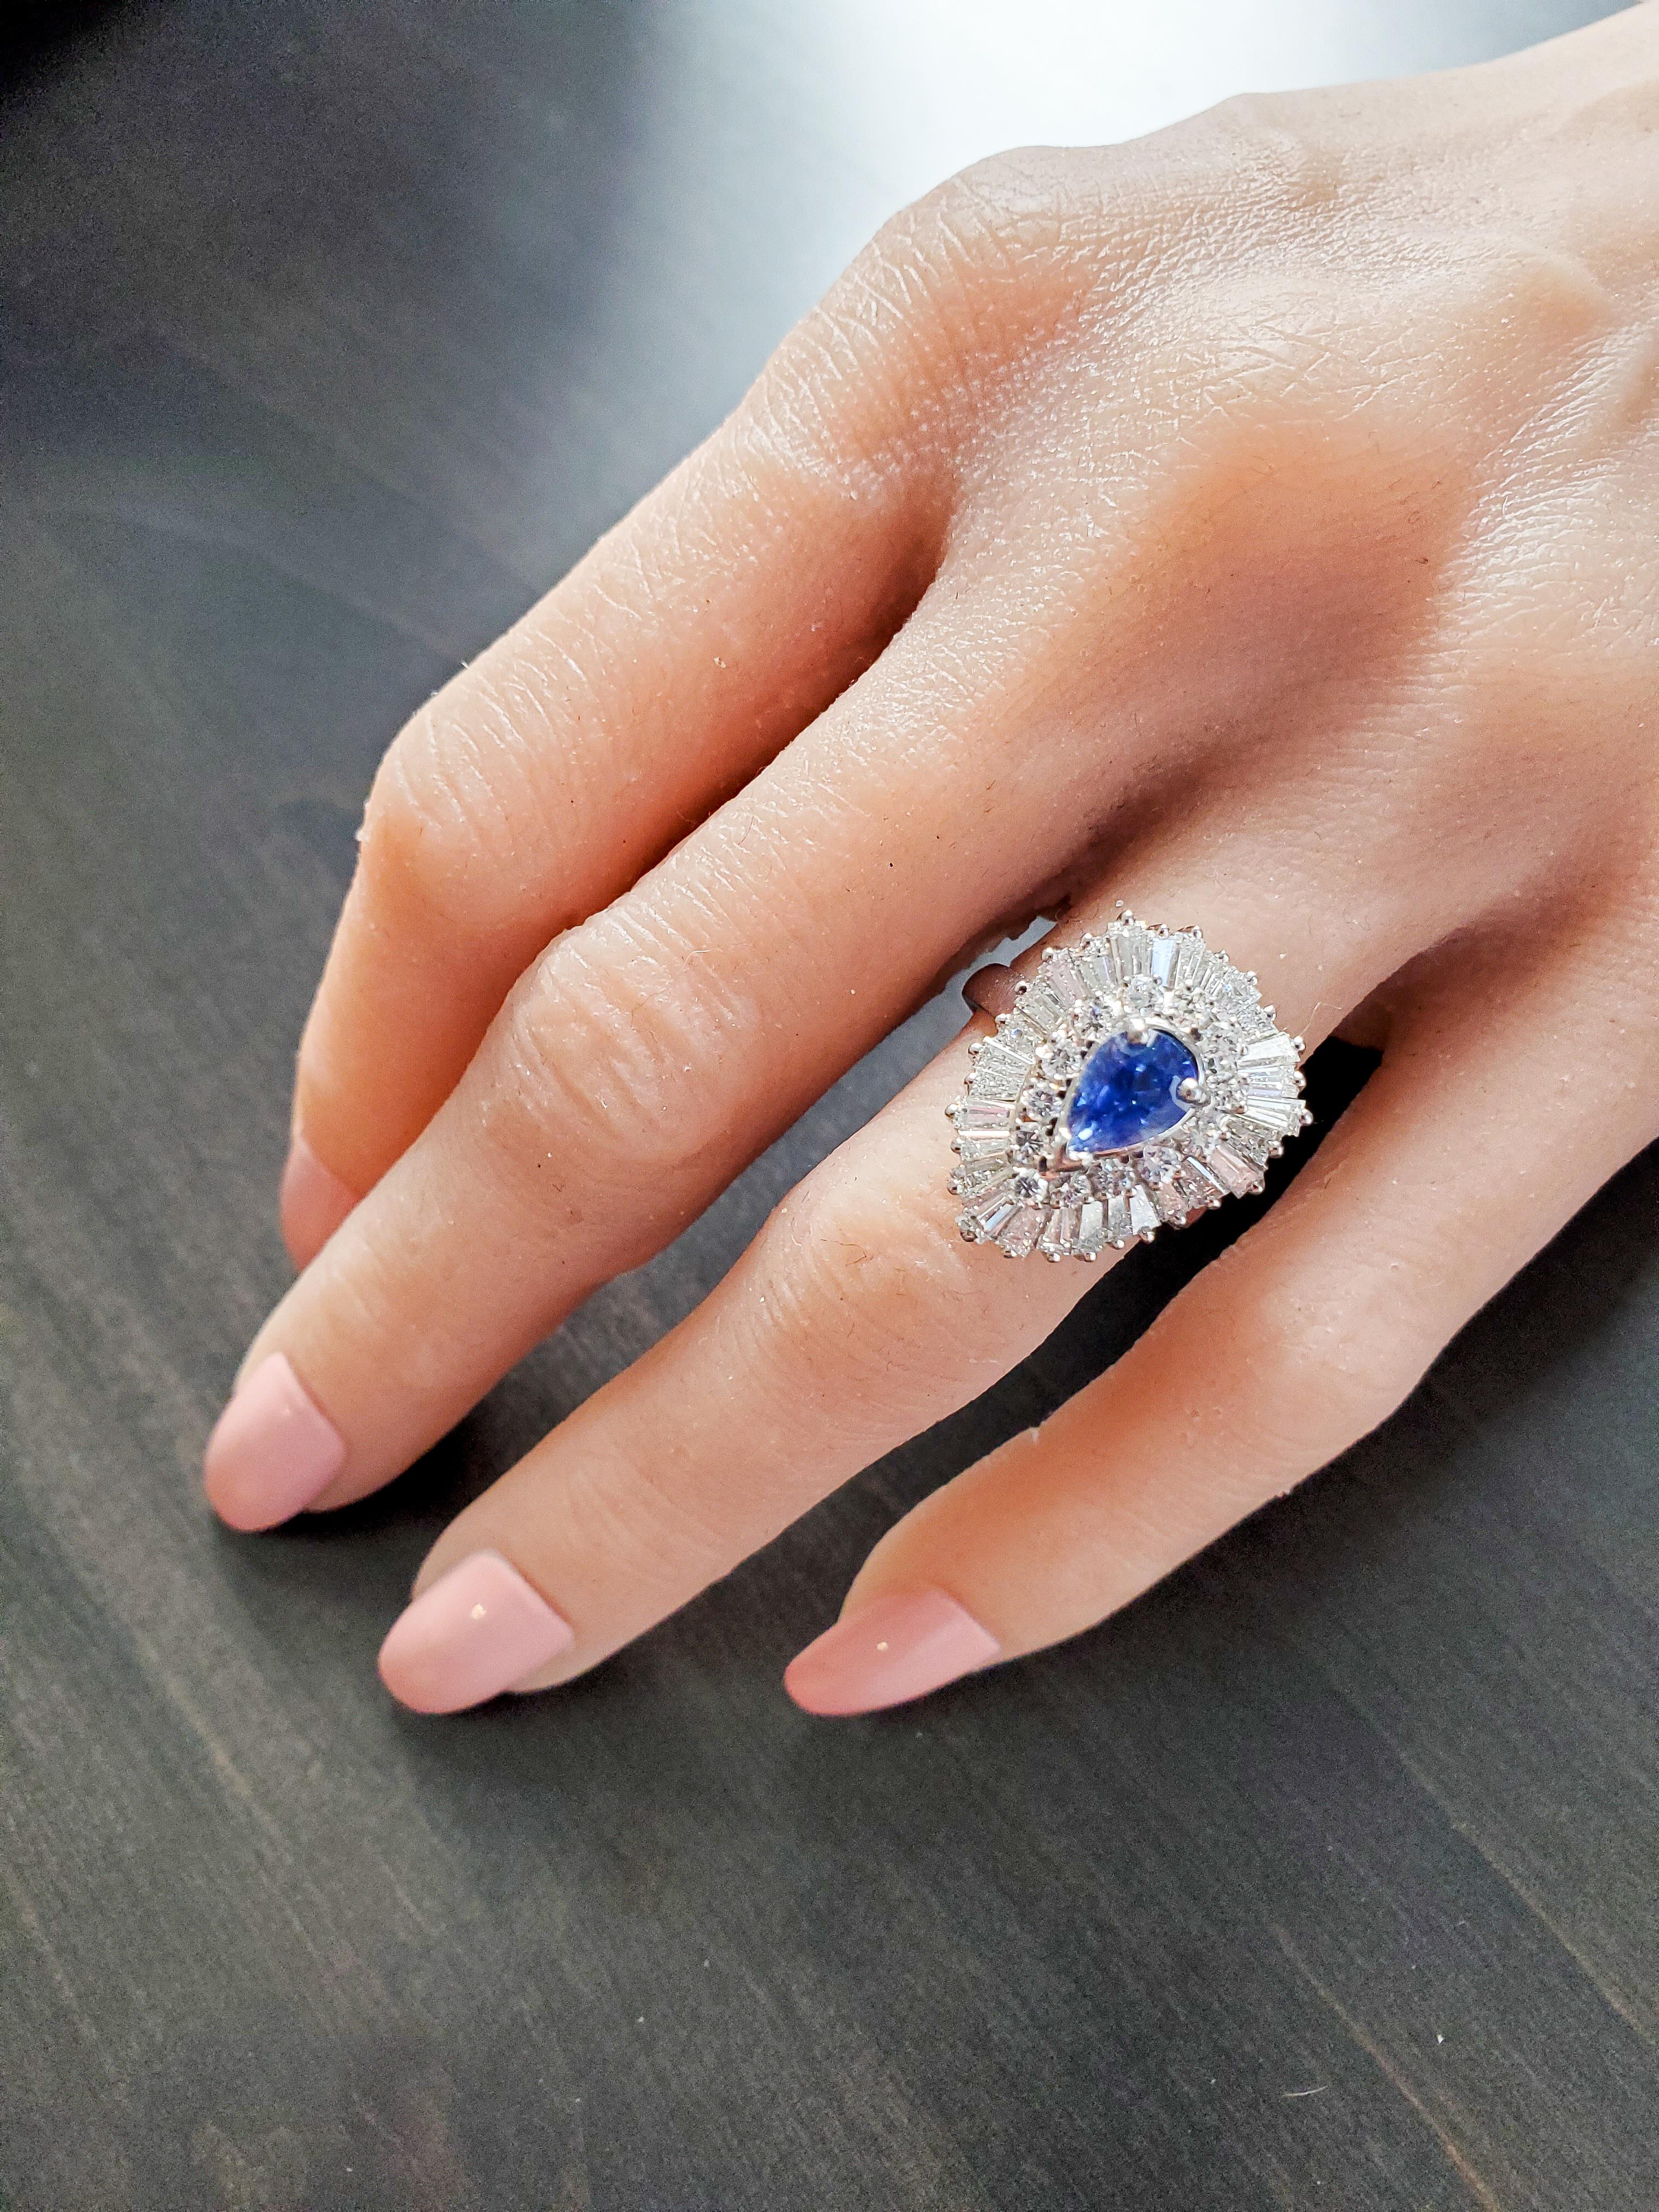 Custom made in luscious platinum with a bright polished finish, this extraordinary cocktail ring features a pear-shaped fine blue sapphire prong set in the center with a weight of 1.21 carats. Sparkling round brilliant cut and shimmering baguette